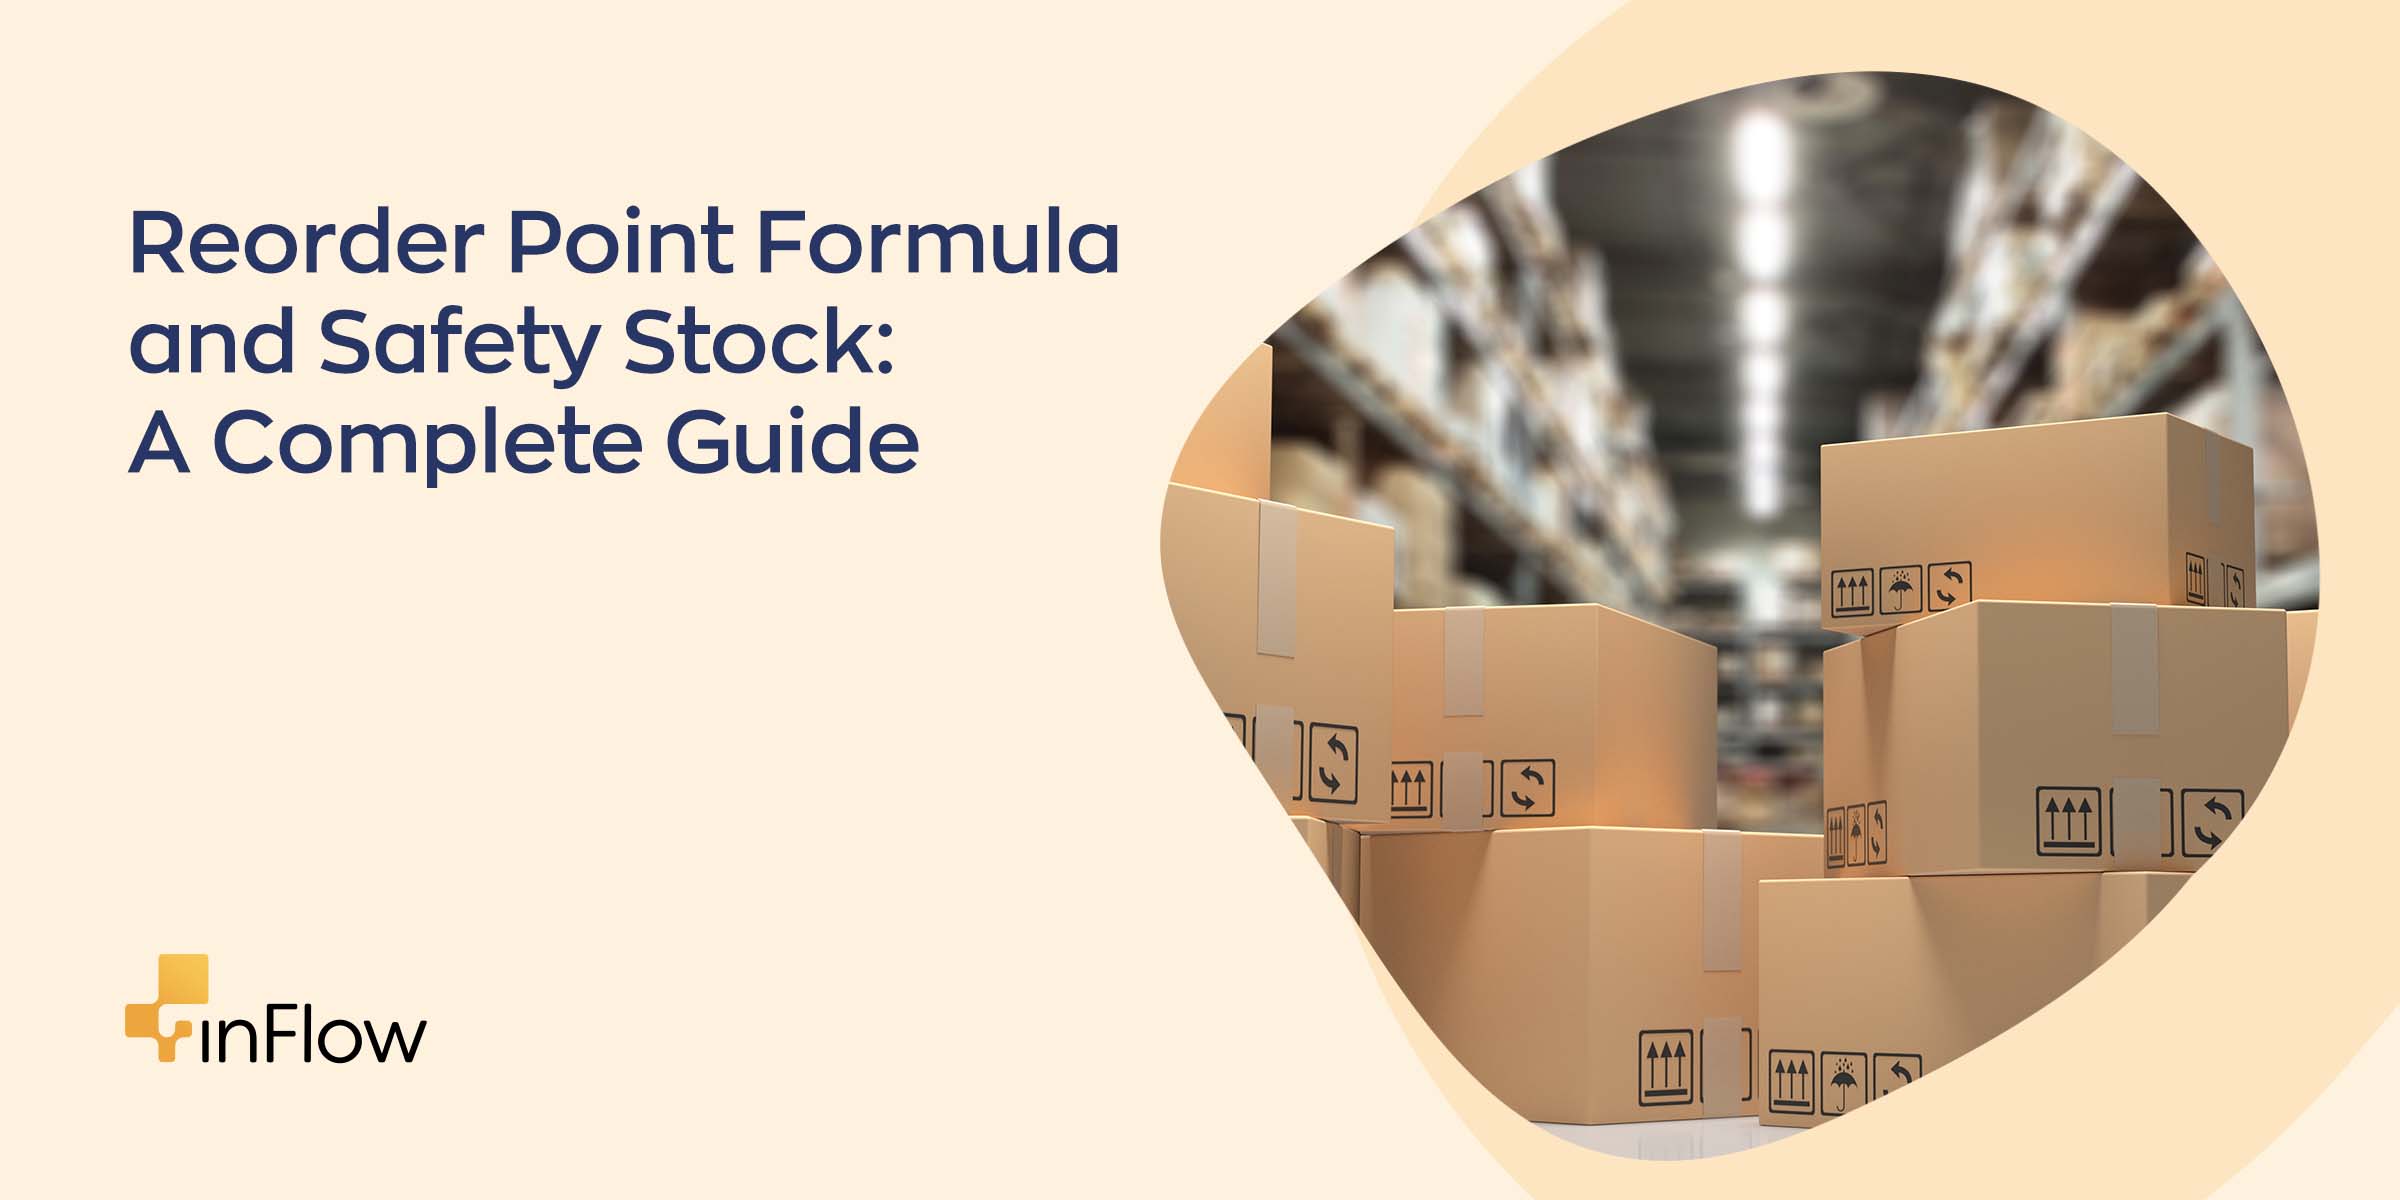 Reorder Point Formula and Safety Stock: A Complete Guide